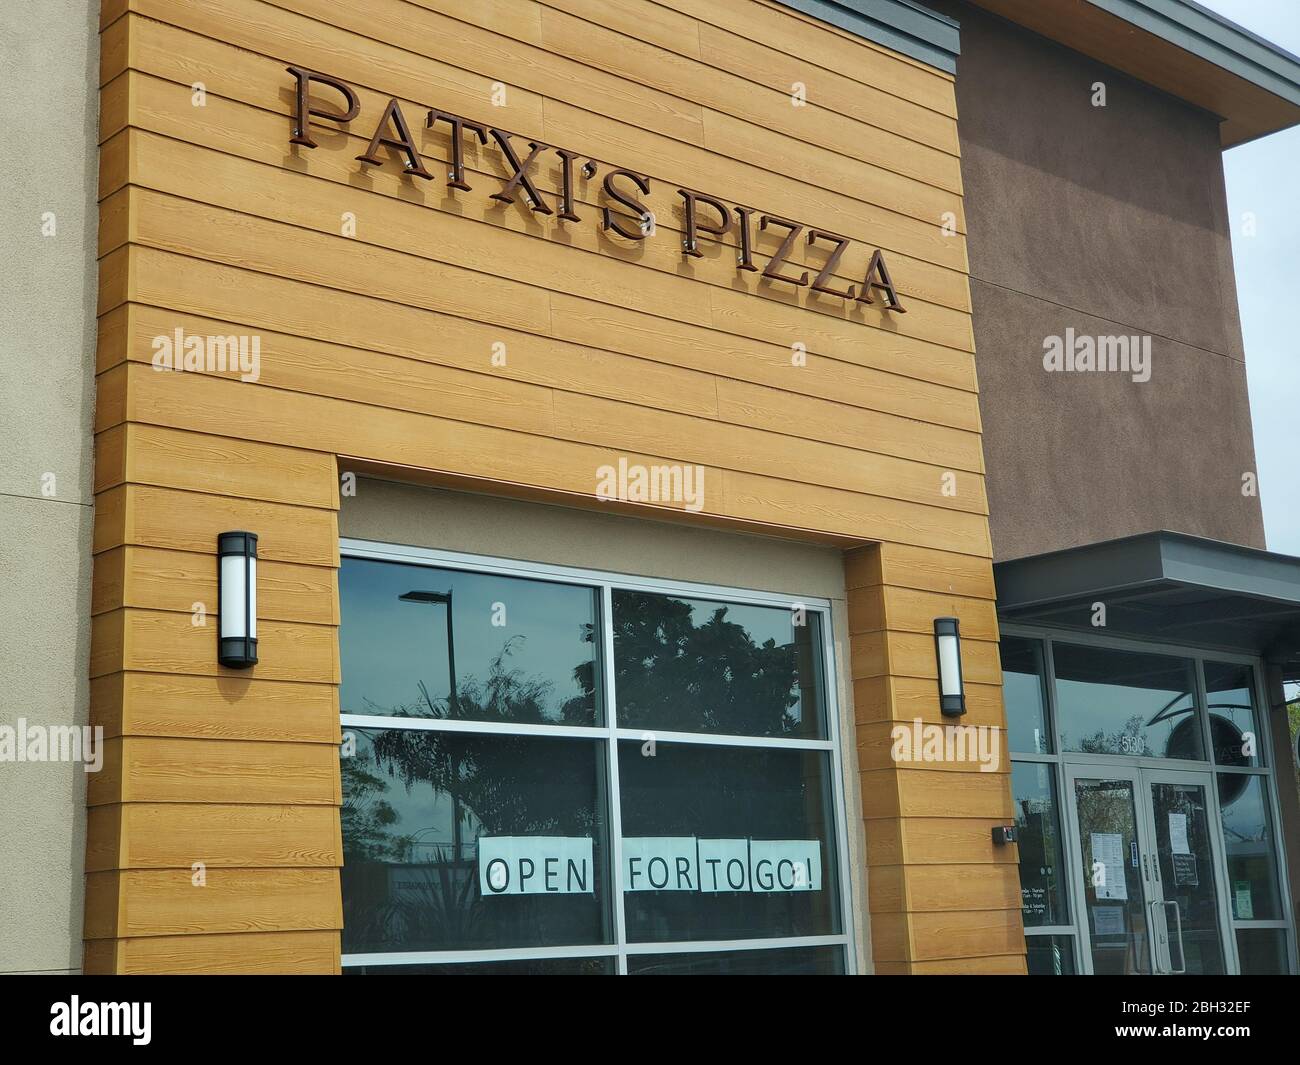 Facade of Patxi's Pizza with banner stating that the restaurant is open for takeout during an outbreak of the COVID-19 coronavirus in Dublin, California, April 8, 2020. () Stock Photo